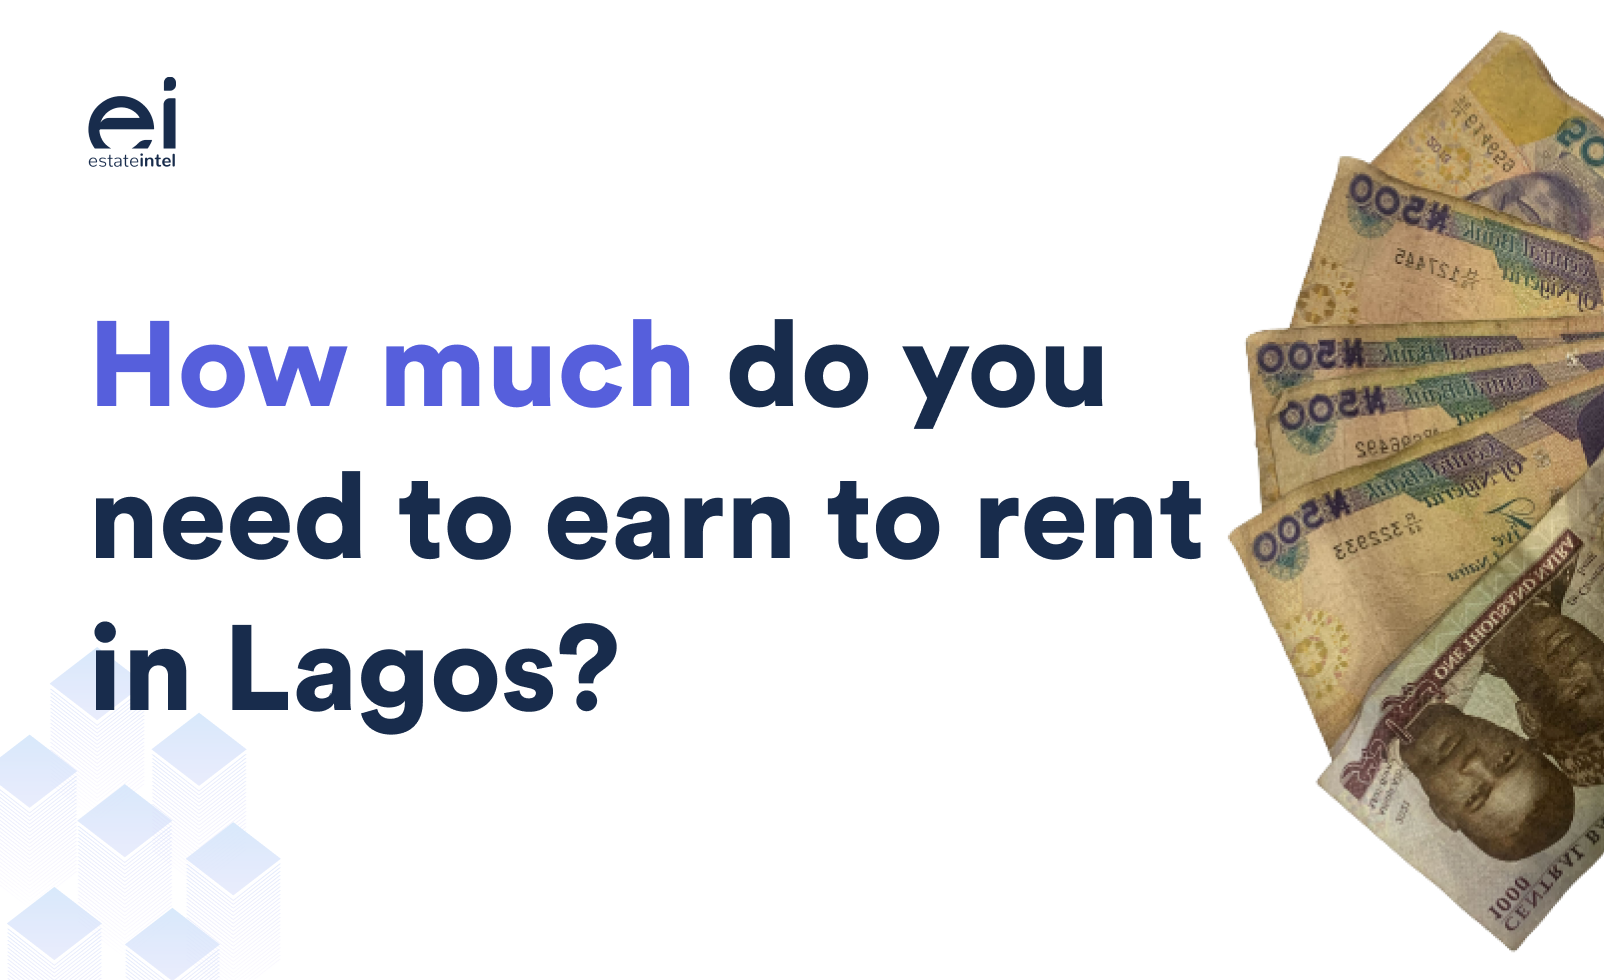 Living in Lagos: The Average Salary of a 2-bedroom Renter in the City of Lagos